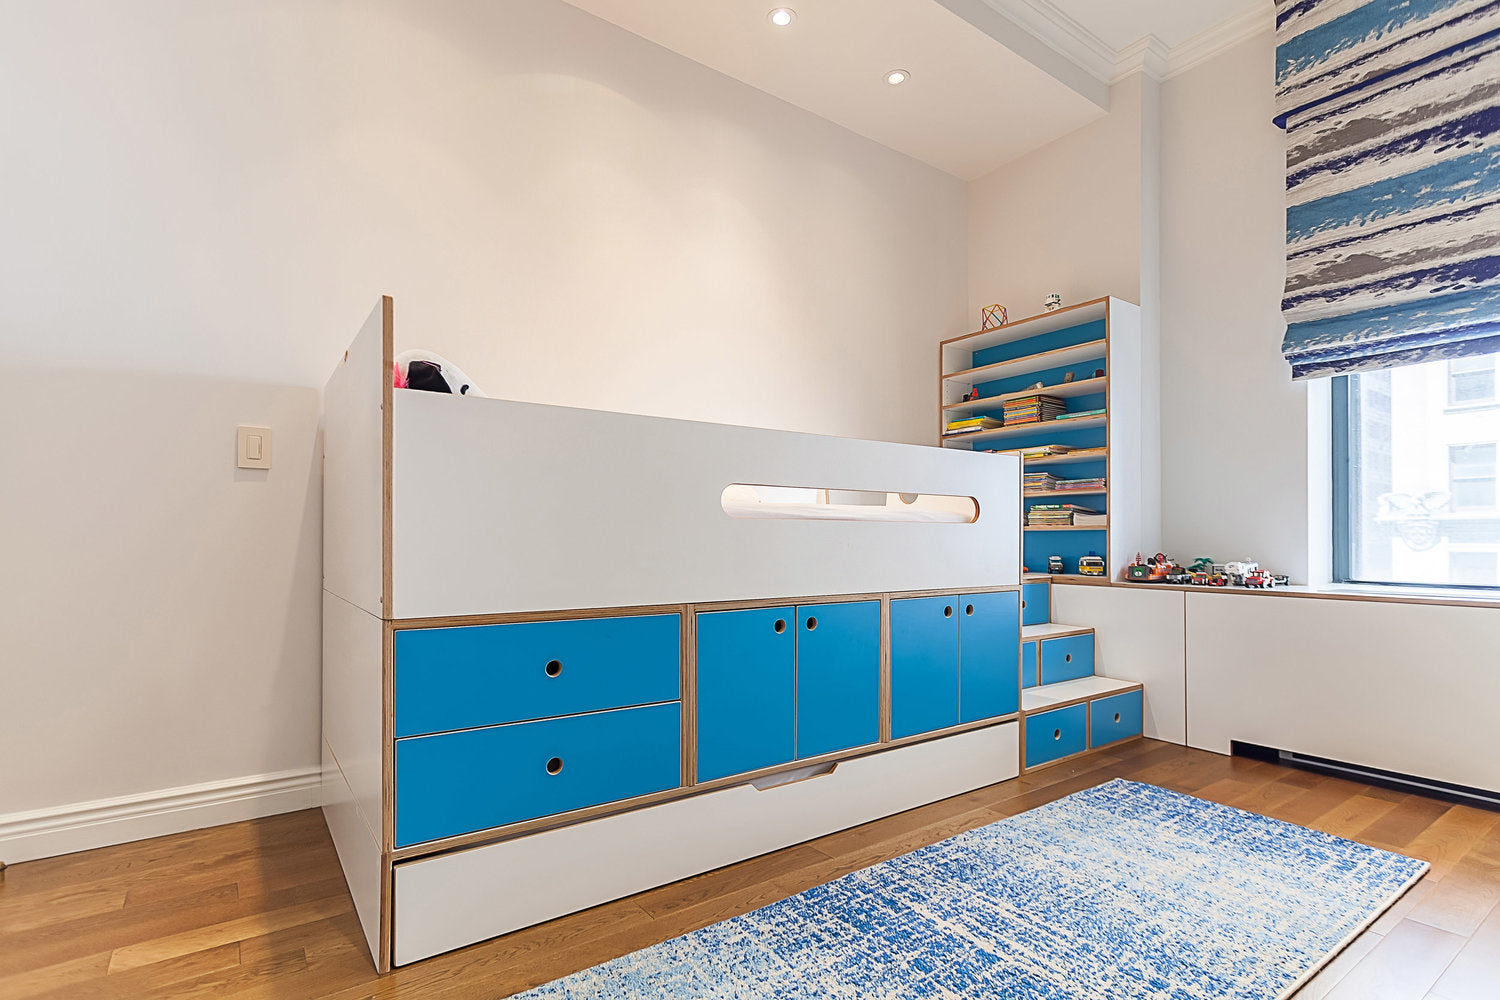 Modern children’s room with blue drawers and patterned rug.